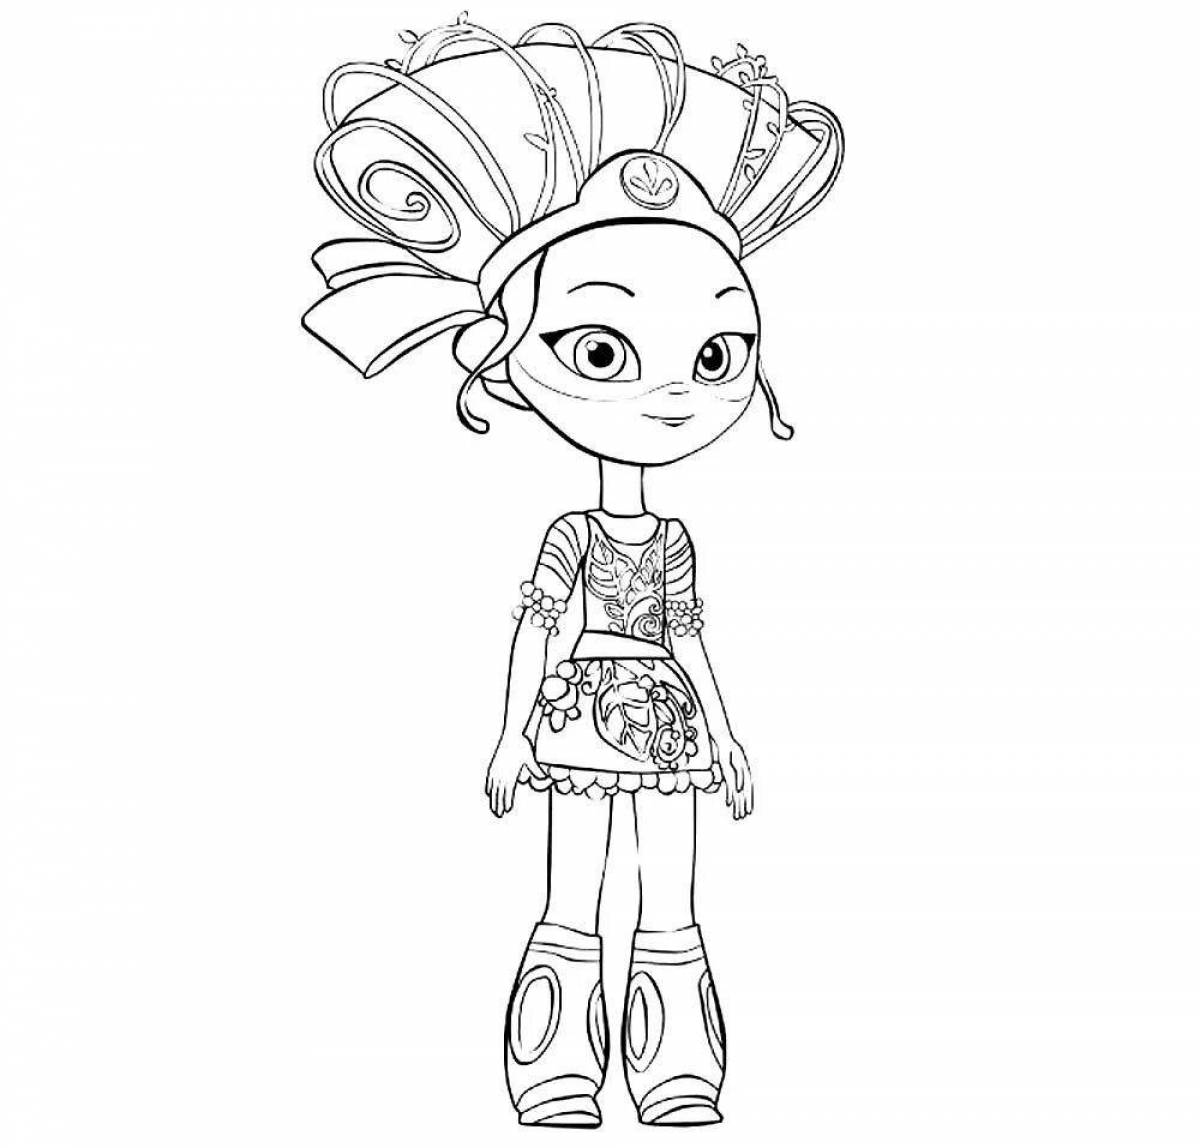 Radiant coloring page enable fairy patrol